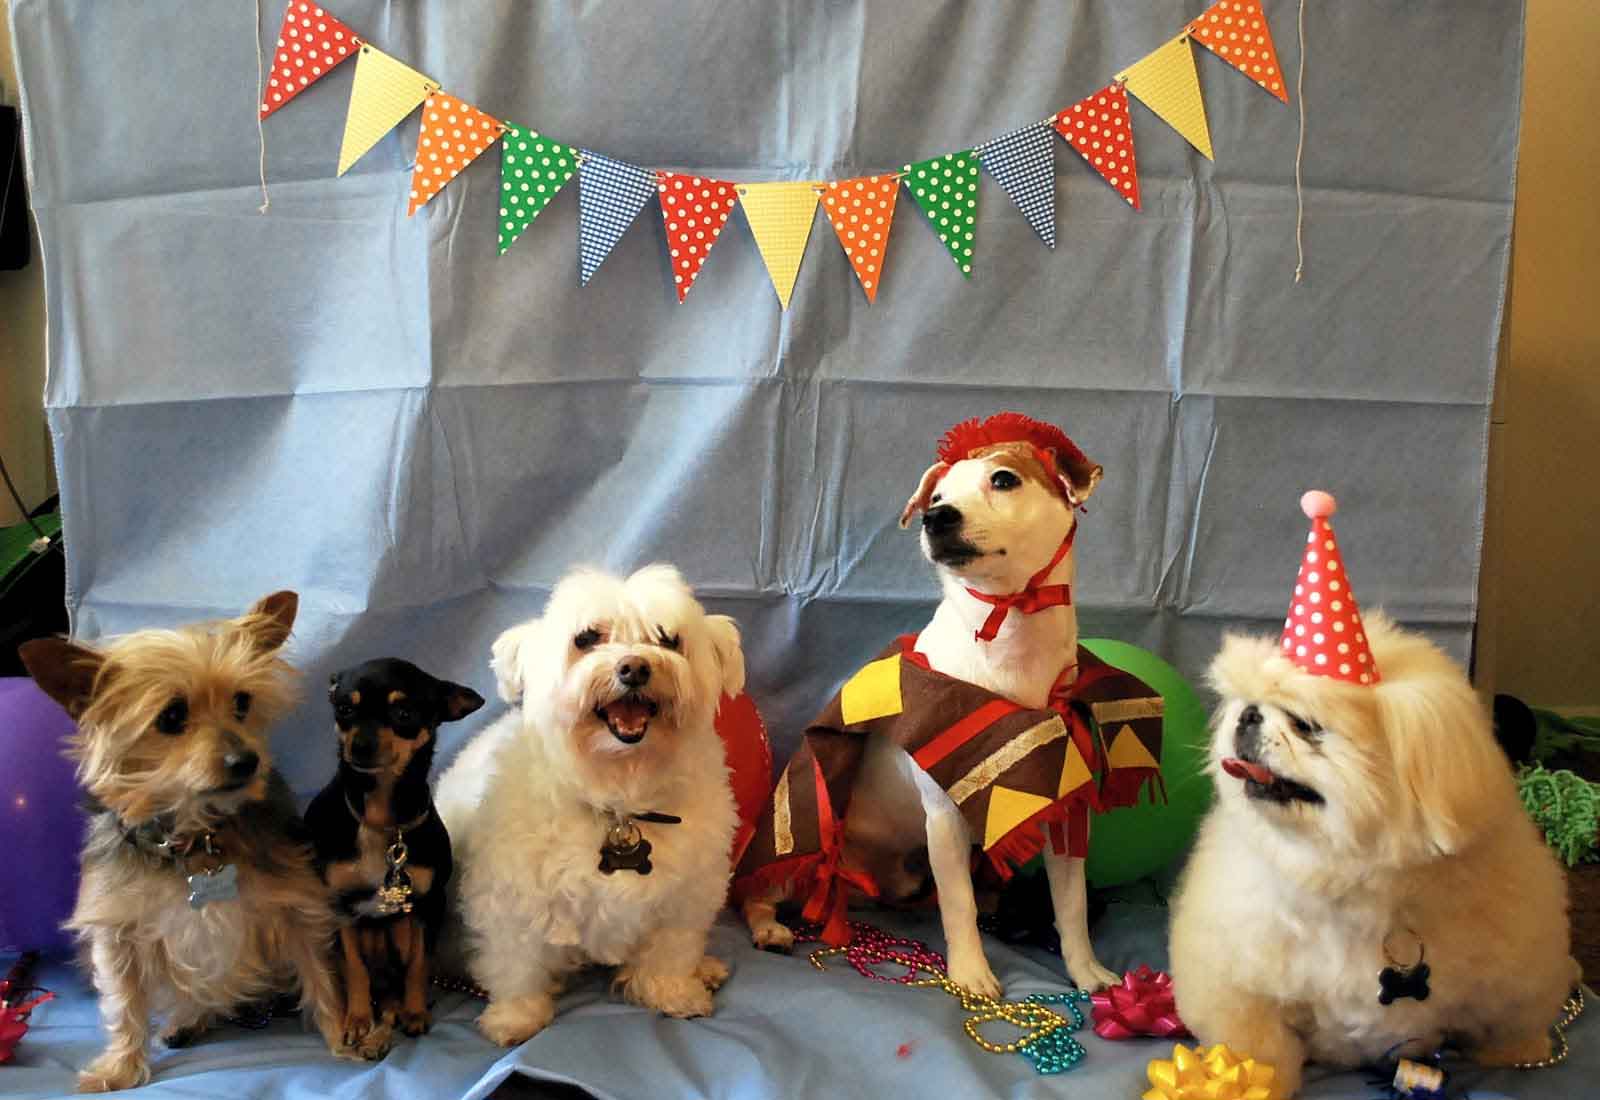 7 Things to Remember before Planning your Dogâs Birthday Party